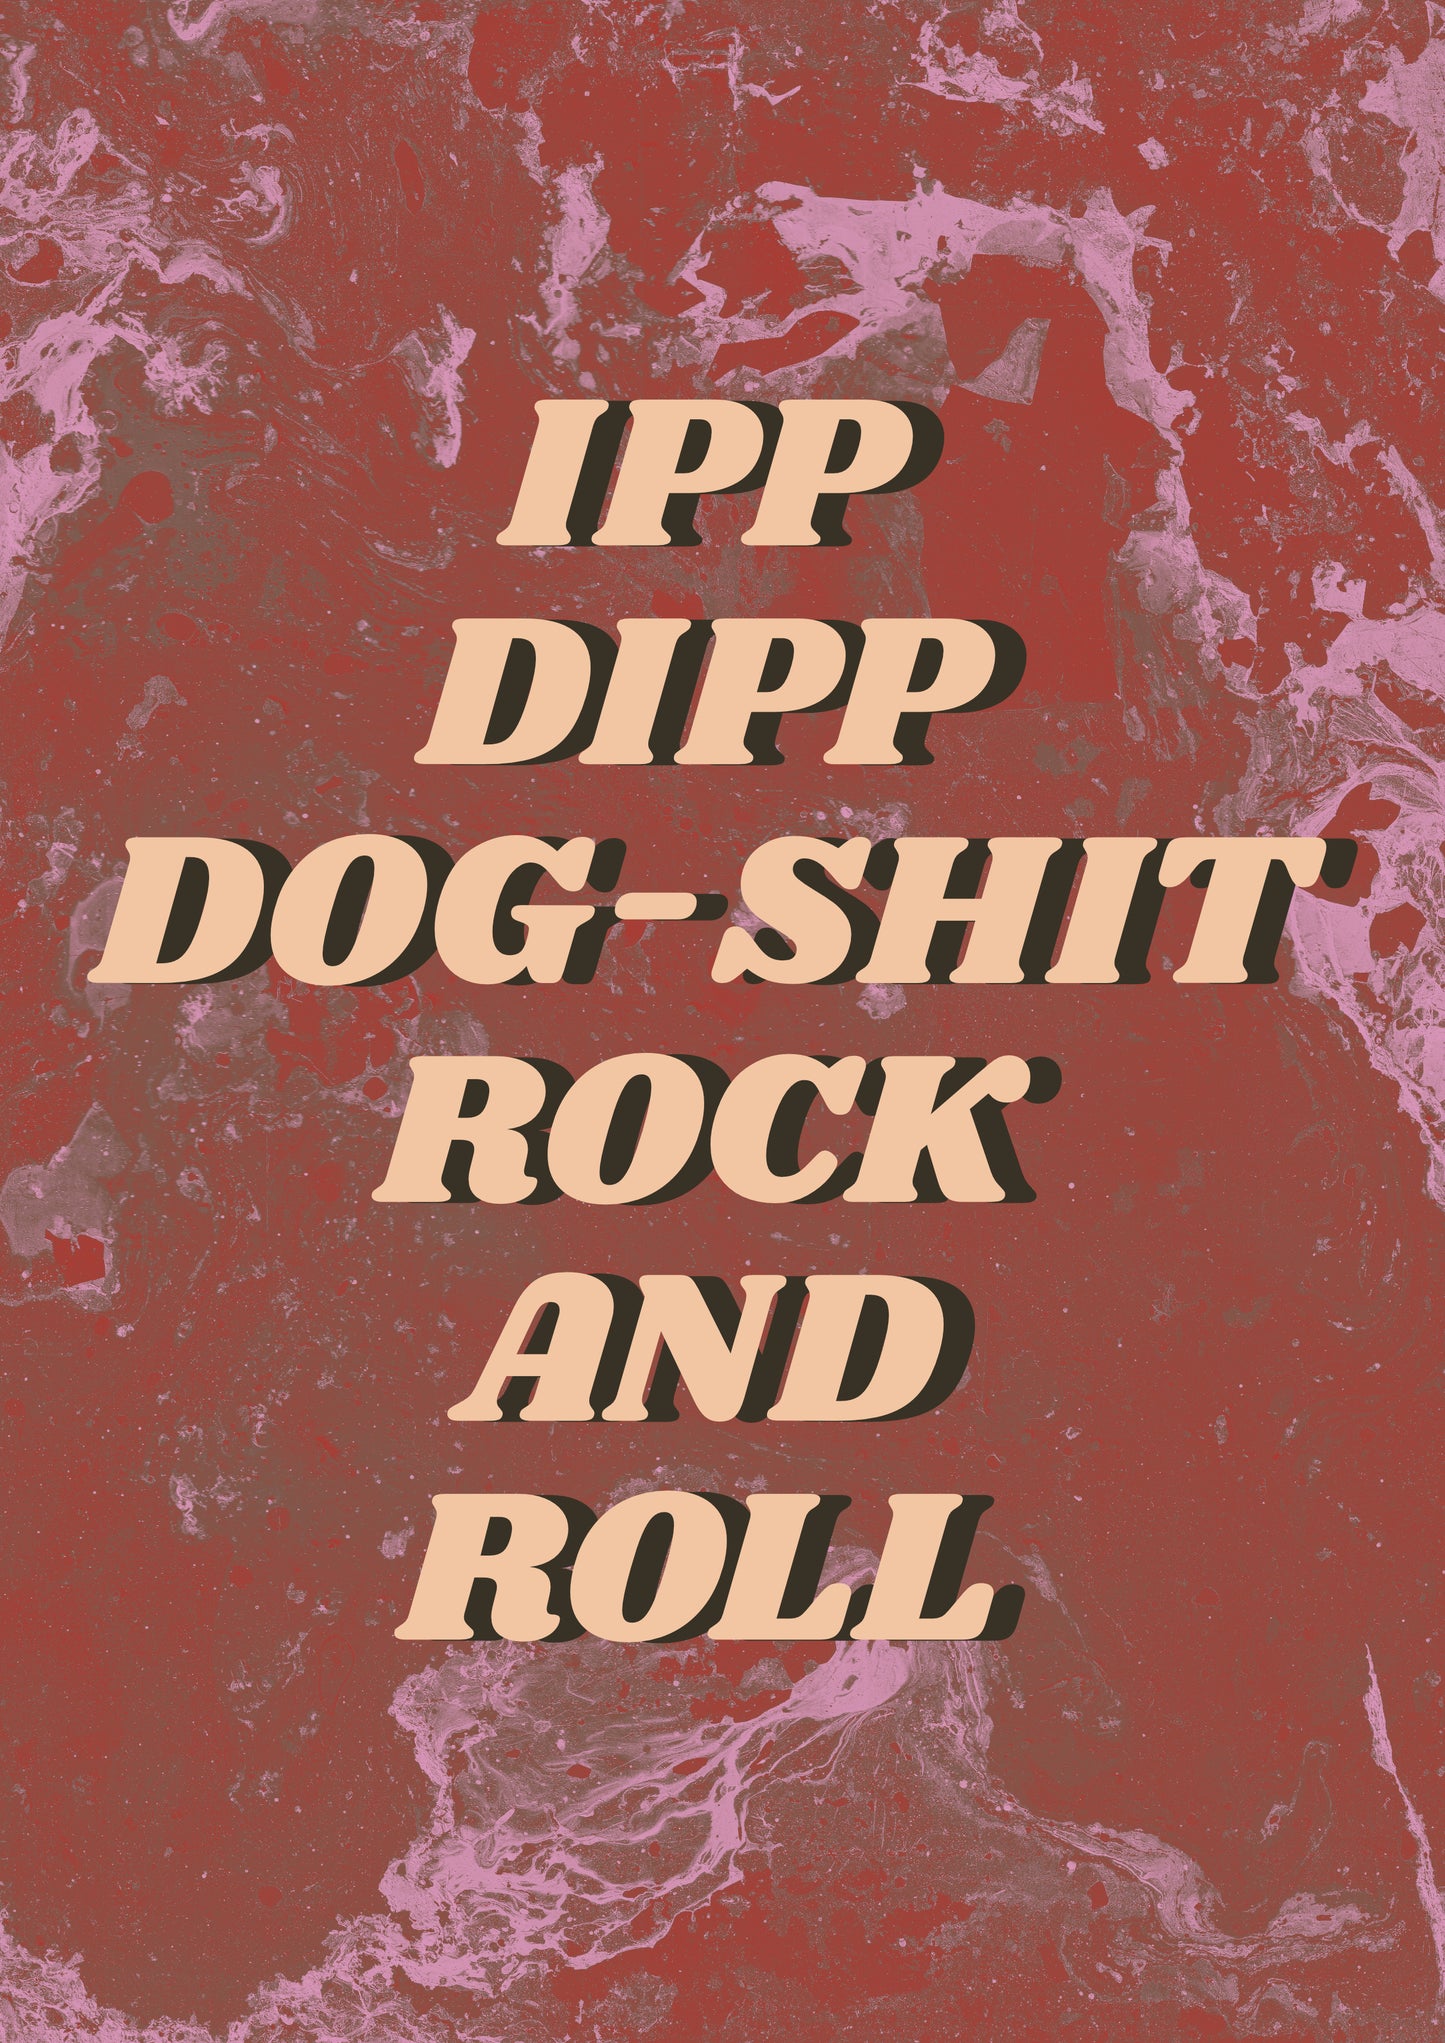 IPP-DIPP DOG SHIT ROCK AND ROLL